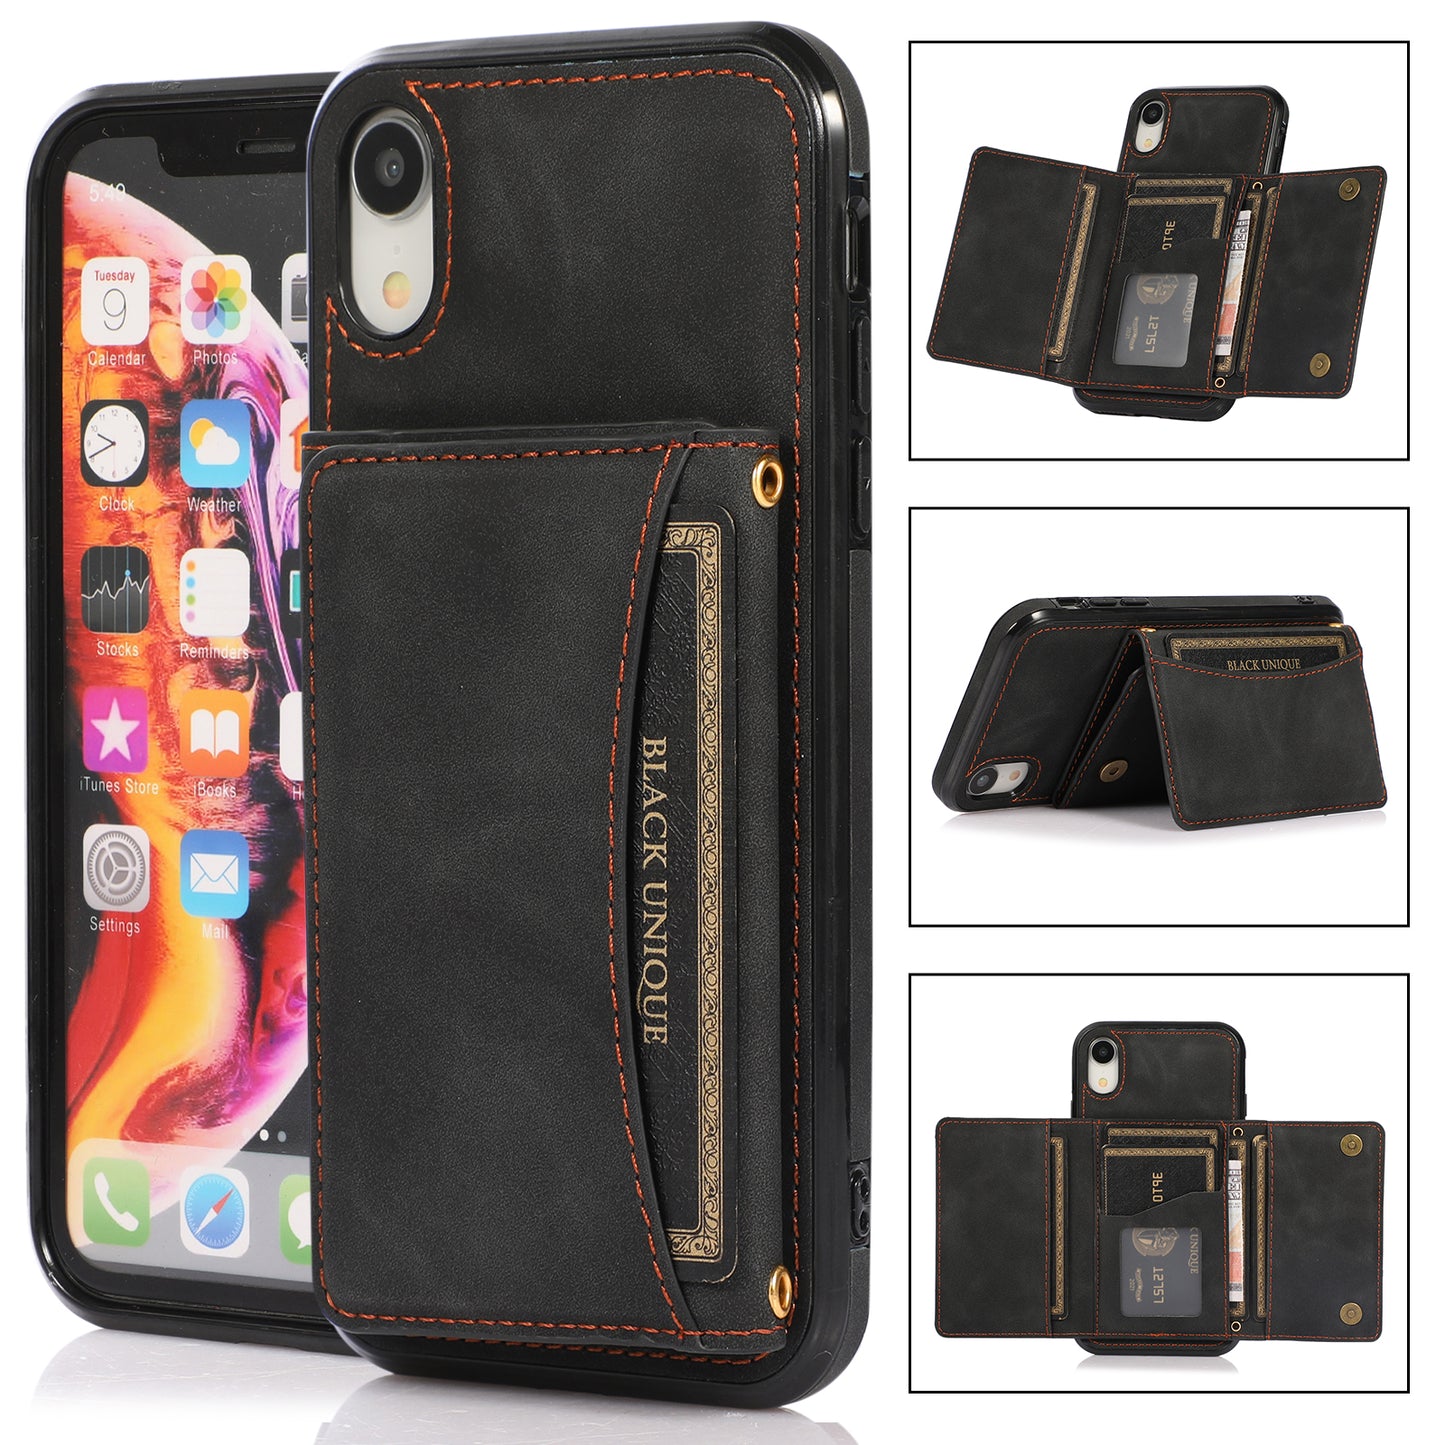 Customizable Genuine Leather iPhone Case with Trifold Wallet for iPhone 13/ iPhone 12/ iPhone 11/ iPhone XS/ iPhone 8/ iPhone 7/ iPhone SE 2nd Gen